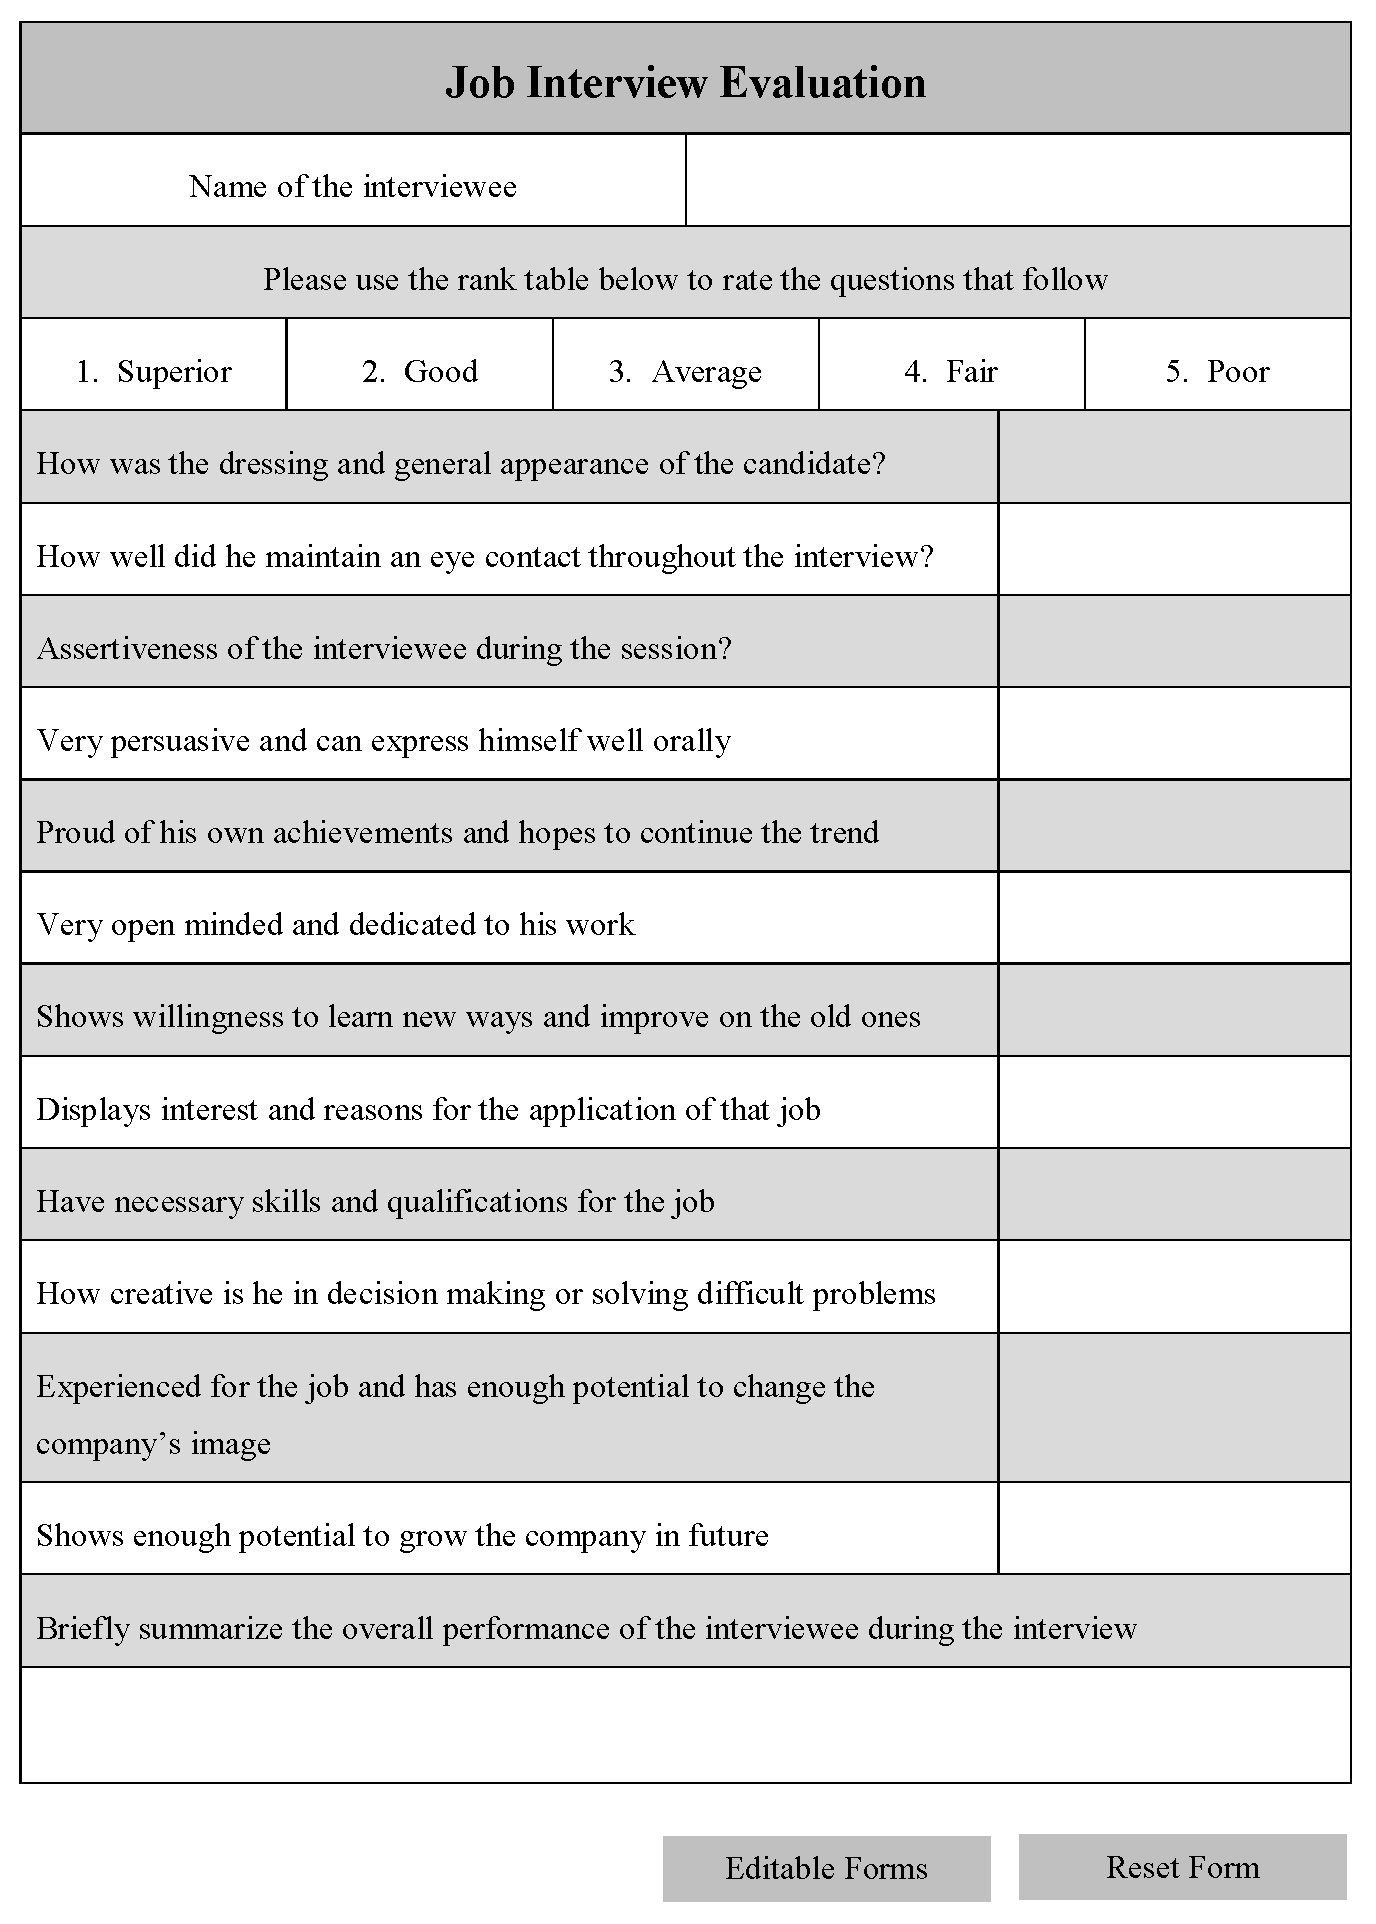 Job Interview Evaluation Form Editable Forms